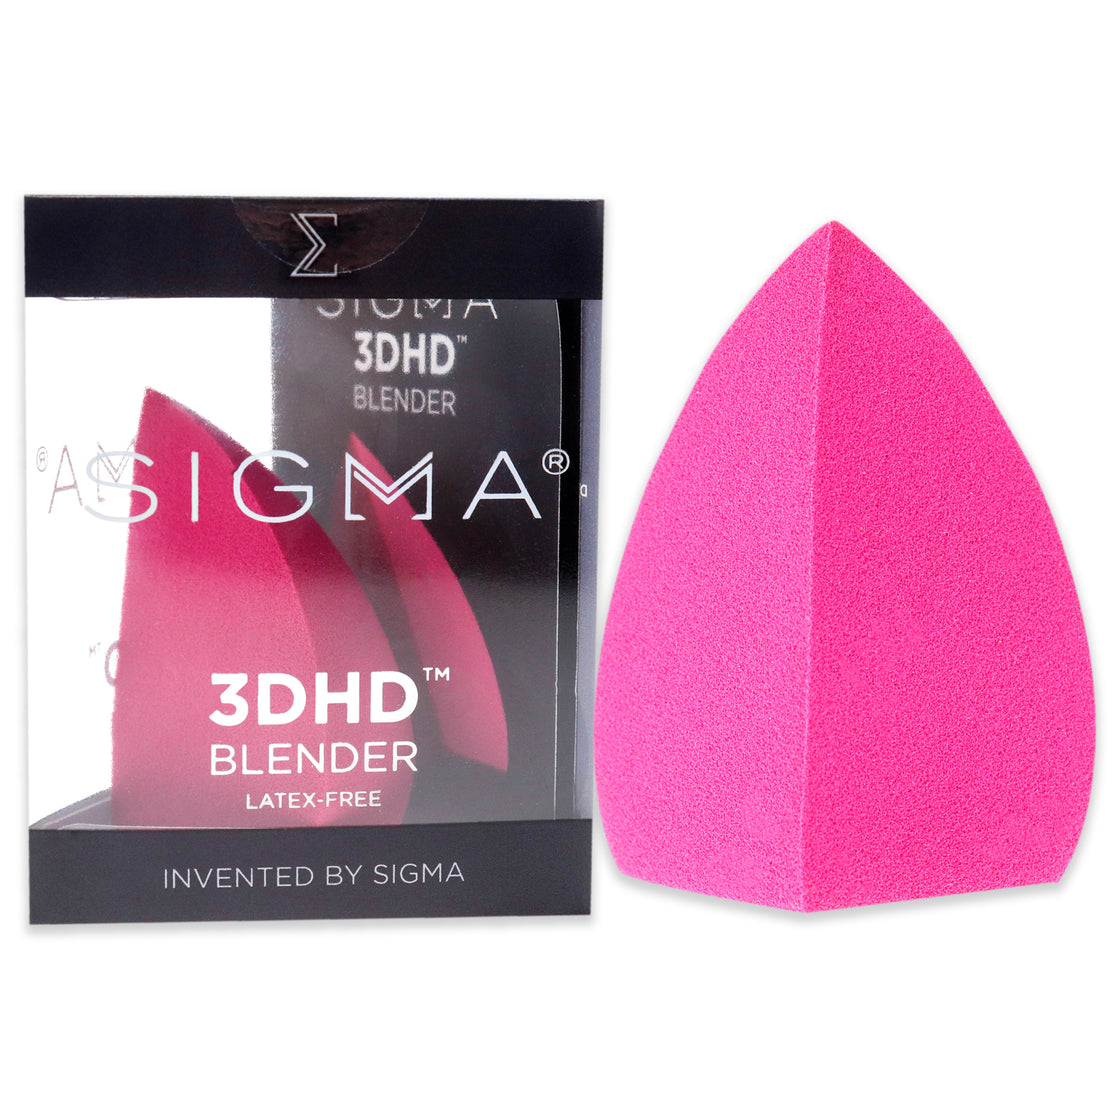 3DHD Blender - Pink by SIGMA for Women - 1 Pc Sponge